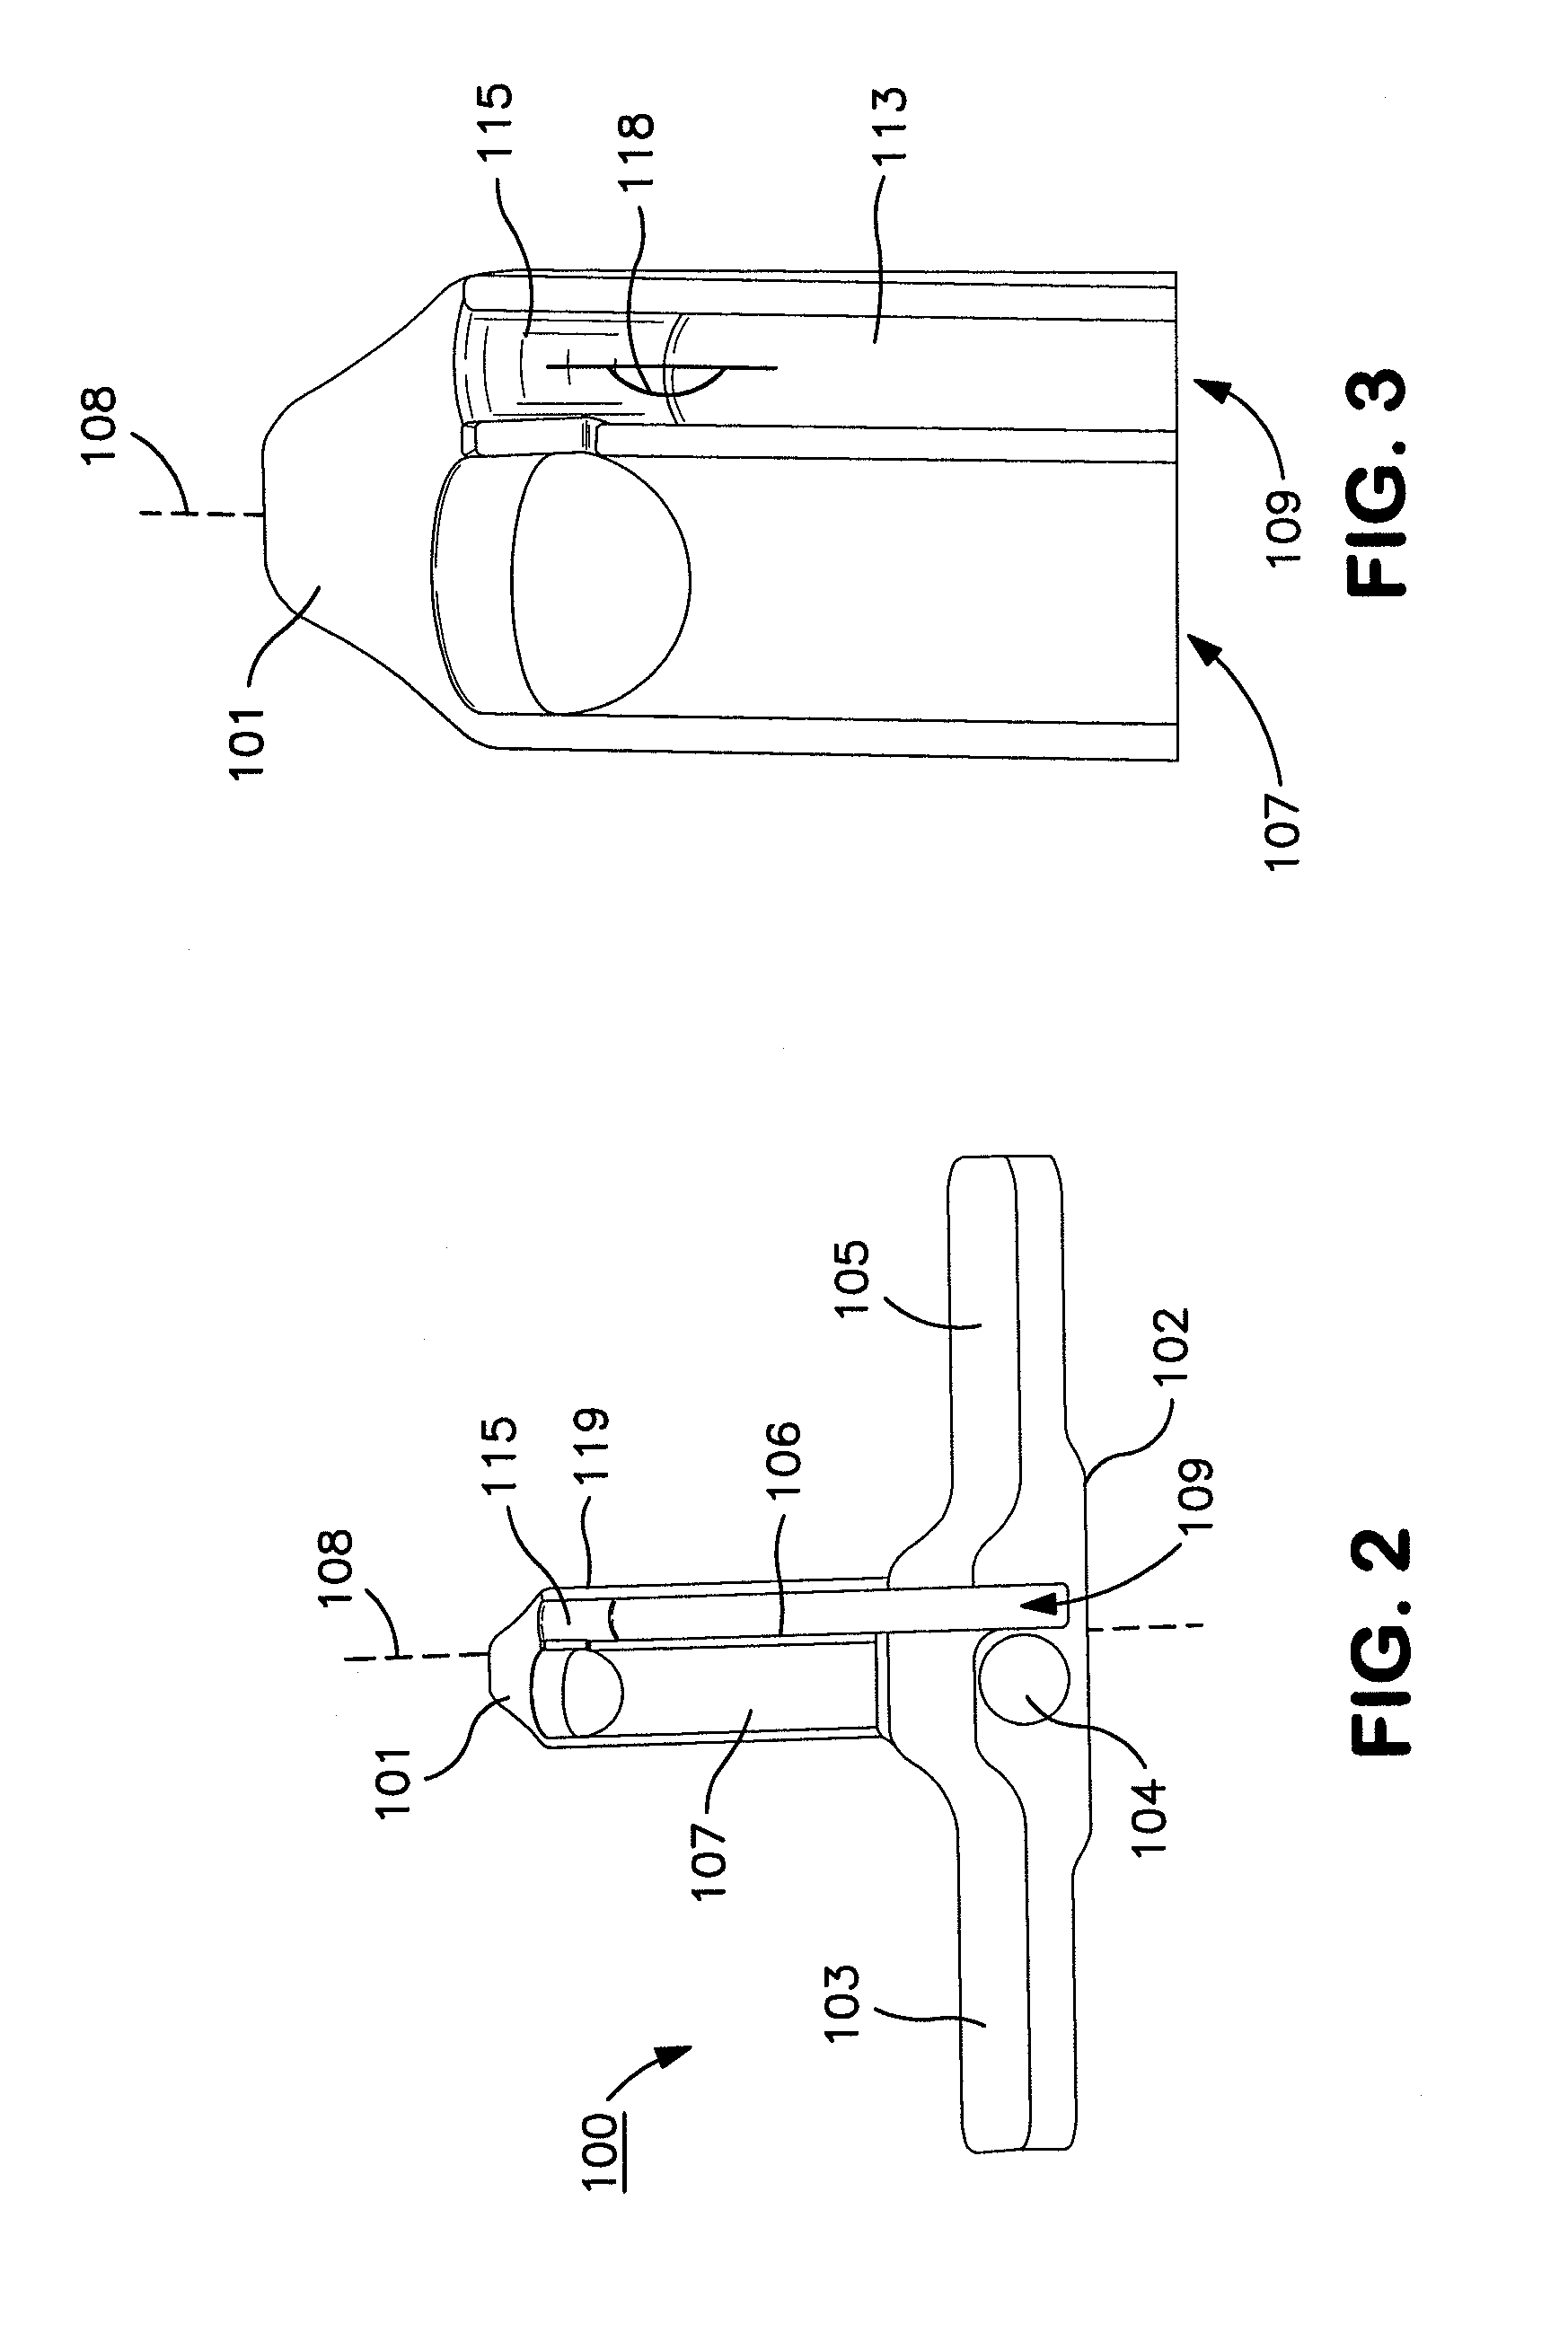 Method and apparatus for endoscopic ligament release